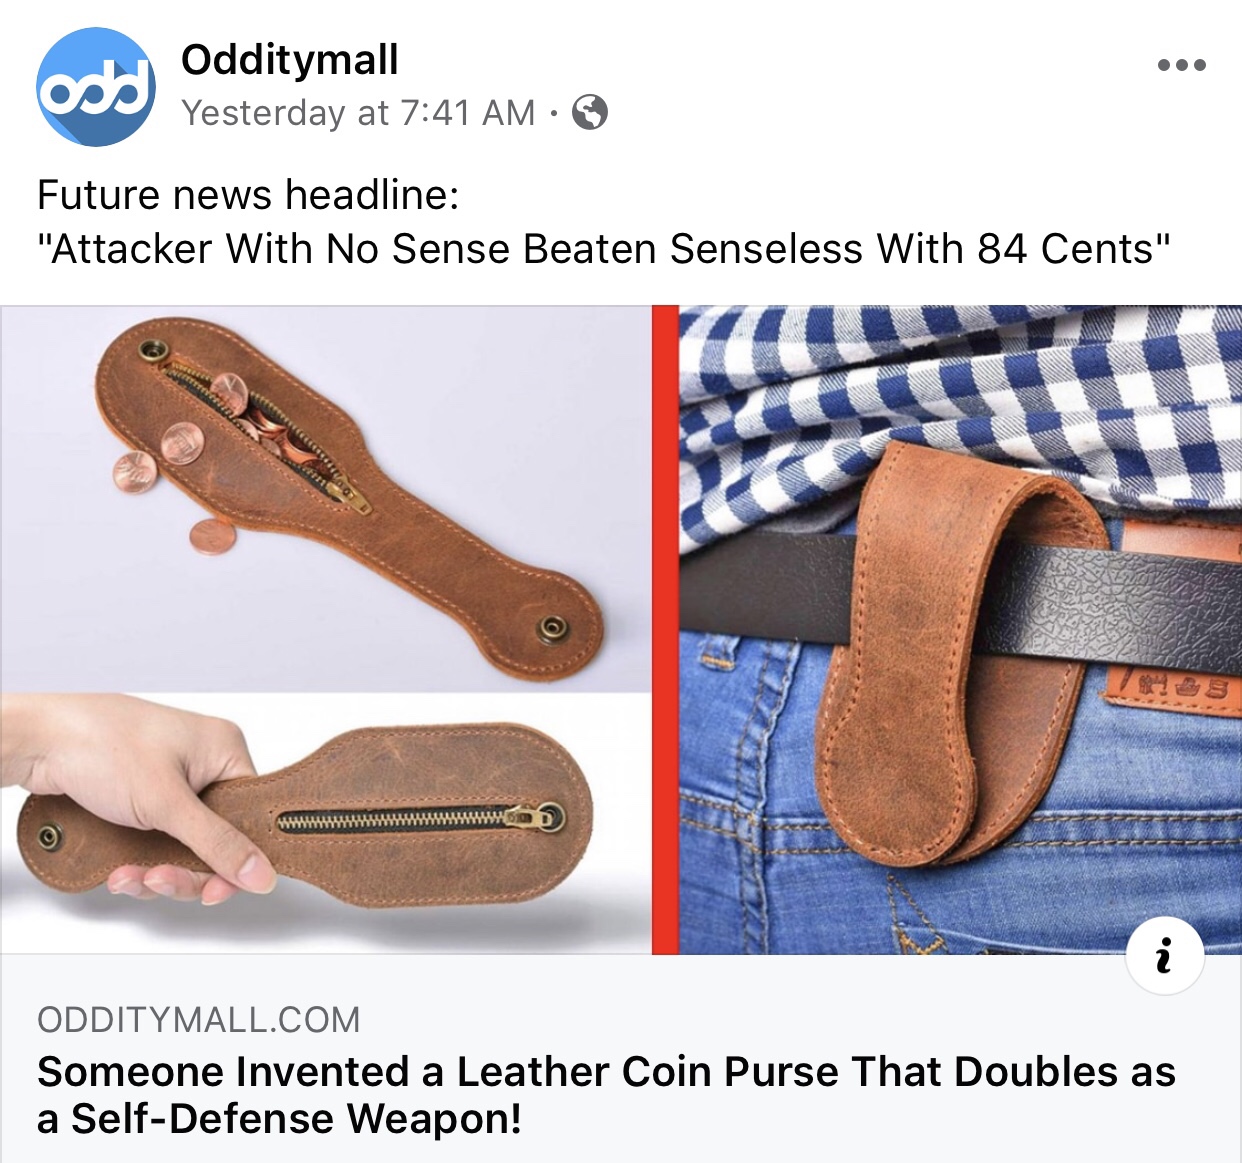 Odditymall Yesterday at Future news headline "Attacker With No Sense Beaten Senseless With 84 Cents" WWW610 D Odditymall.Com Someone Invented a Leather Coin Purse That Doubles as a SelfDefense Weapon!